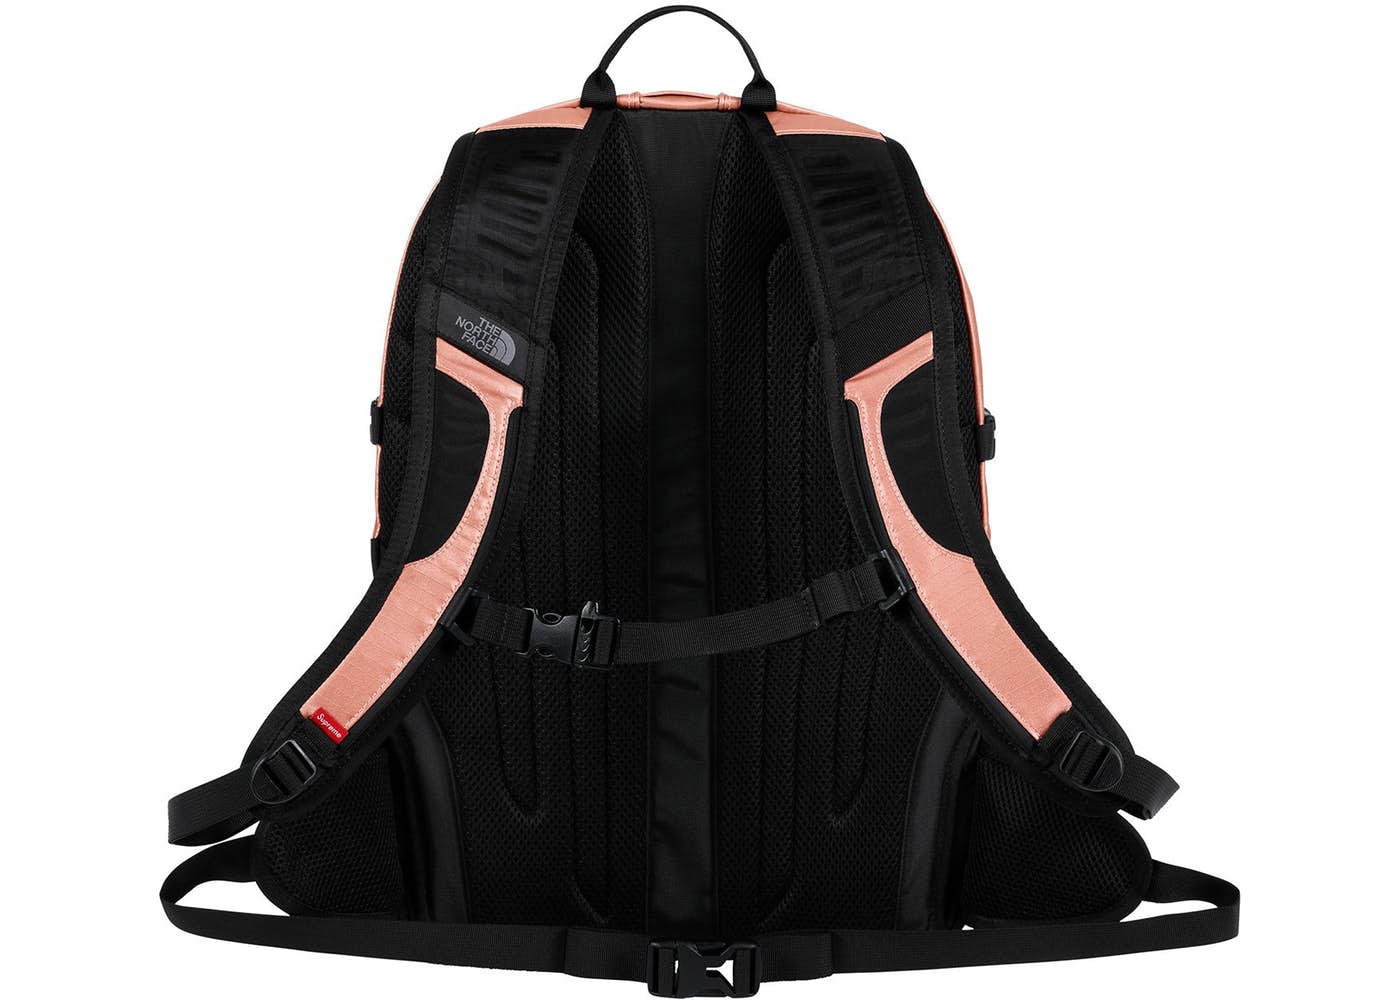 Supreme The North Face Metallic Borealis Backpack- Rose Gold